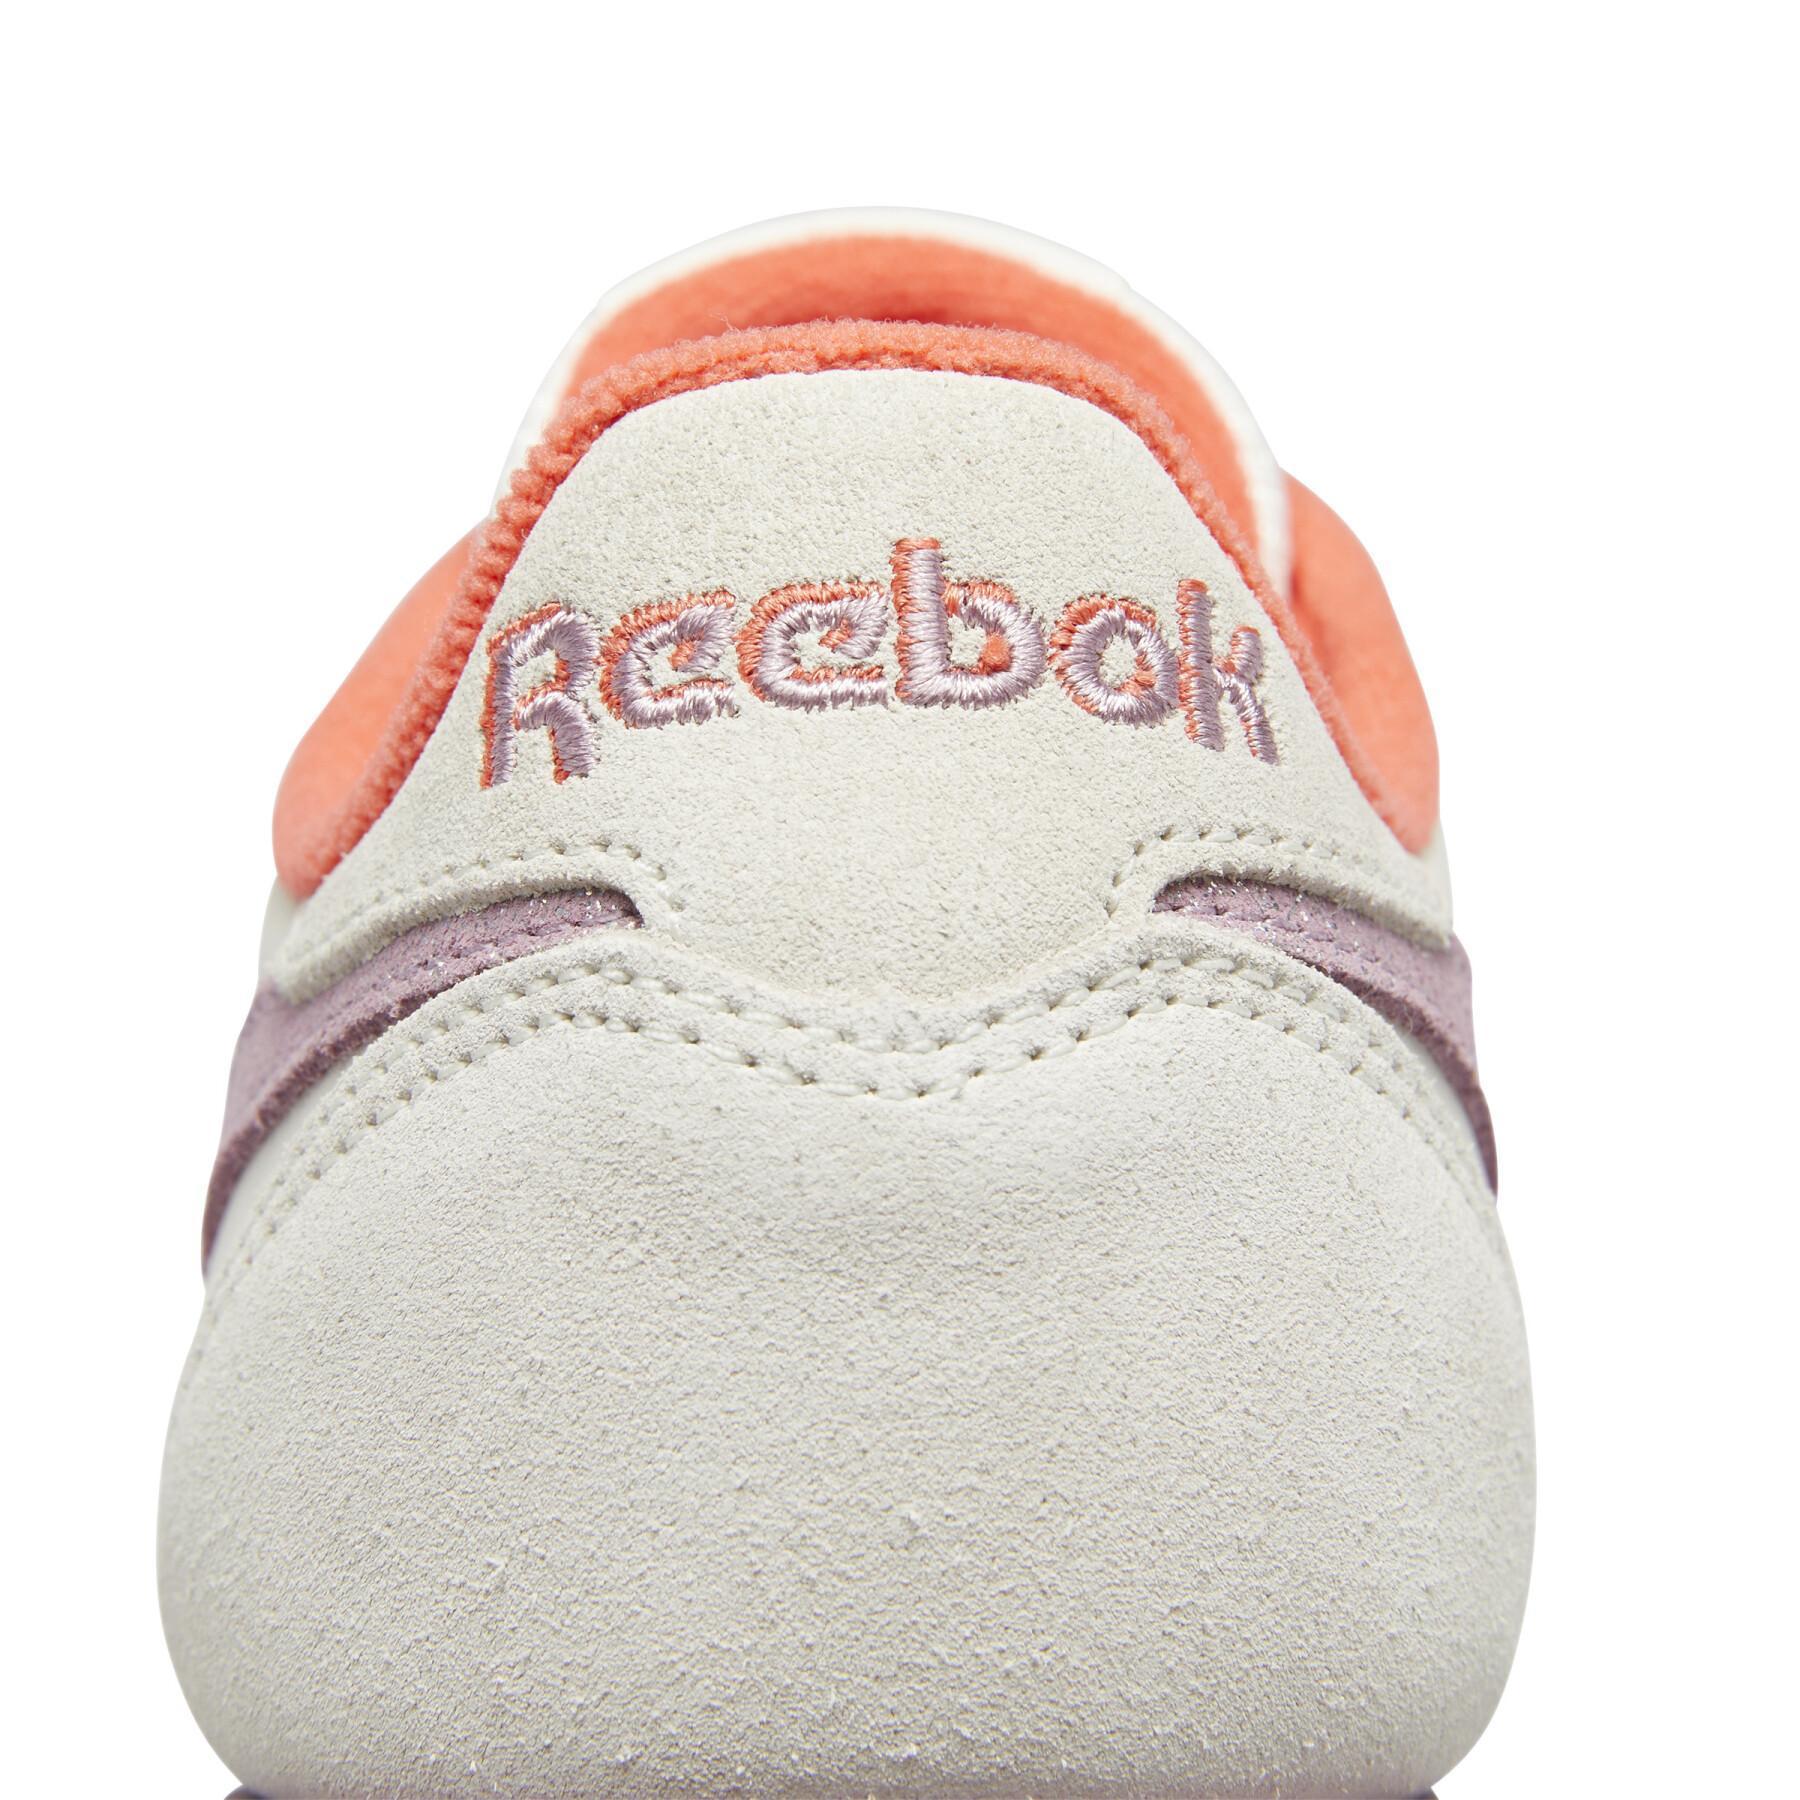 Leather sneakers for women Reebok Classic